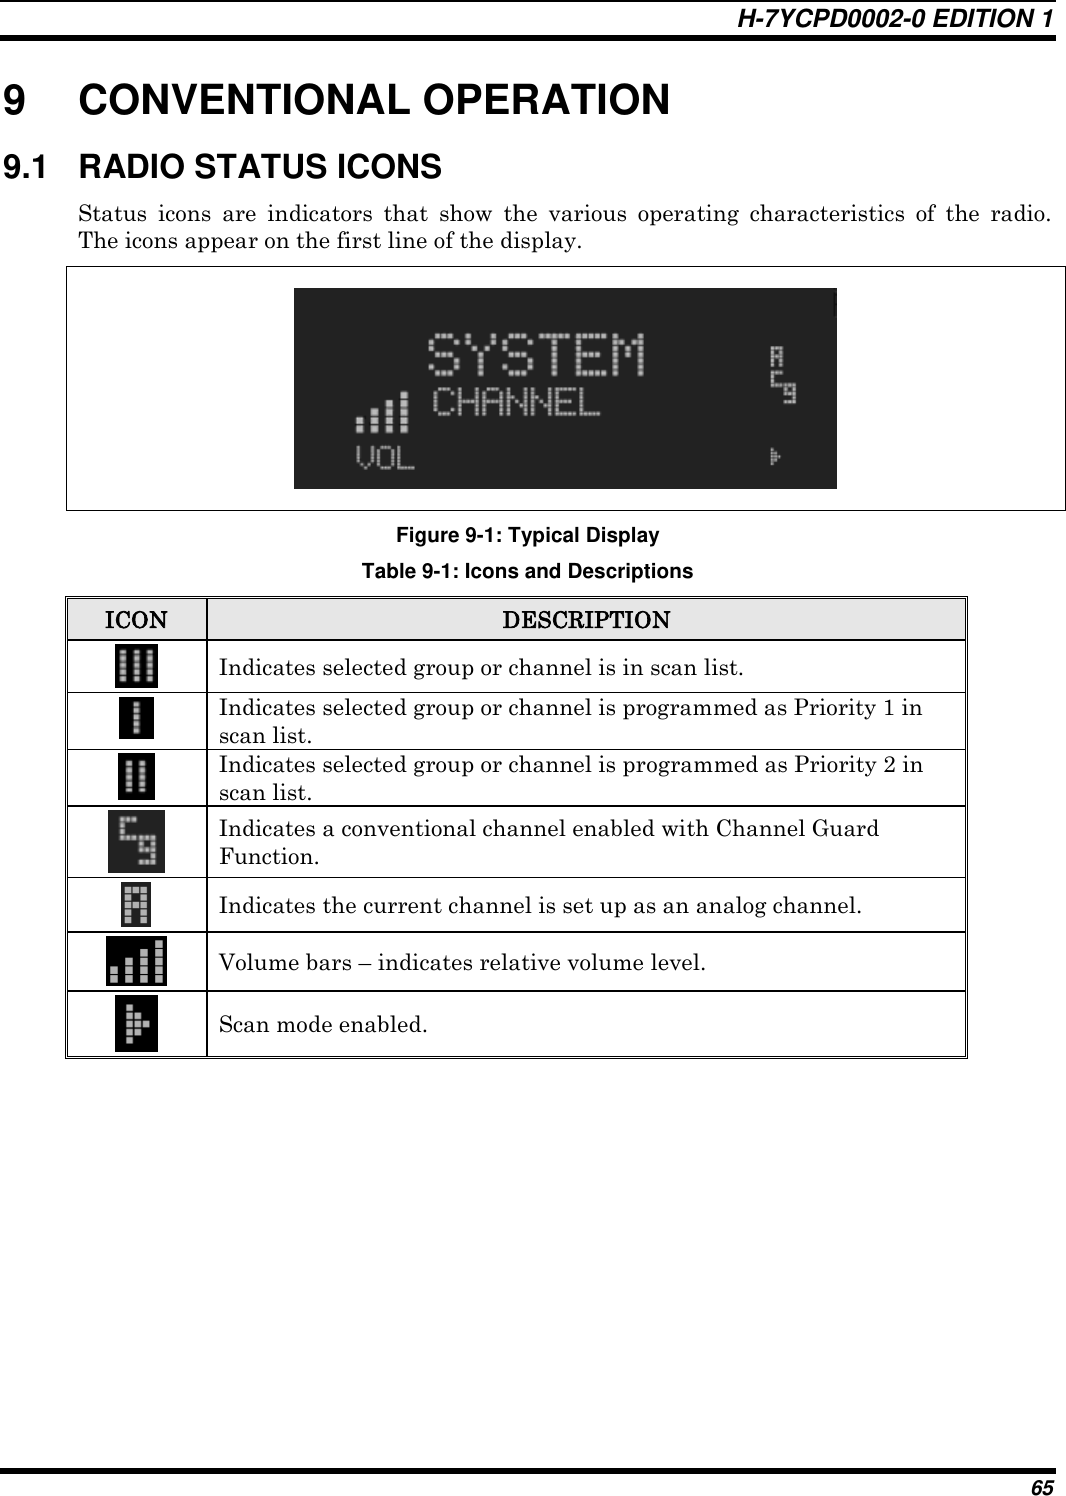 H-7YCPD0002-0 EDITION 1 65 9  CONVENTIONAL OPERATION 9.1  RADIO STATUS ICONS Status  icons  are  indicators  that  show  the  various  operating  characteristics  of  the  radio.  The icons appear on the first line of the display.    Figure 9-1: Typical Display Table 9-1: Icons and Descriptions ICON DESCRIPTION  Indicates selected group or channel is in scan list.  Indicates selected group or channel is programmed as Priority 1 in scan list.  Indicates selected group or channel is programmed as Priority 2 in scan list.  Indicates a conventional channel enabled with Channel Guard Function.  Indicates the current channel is set up as an analog channel.  Volume bars – indicates relative volume level.  Scan mode enabled.  